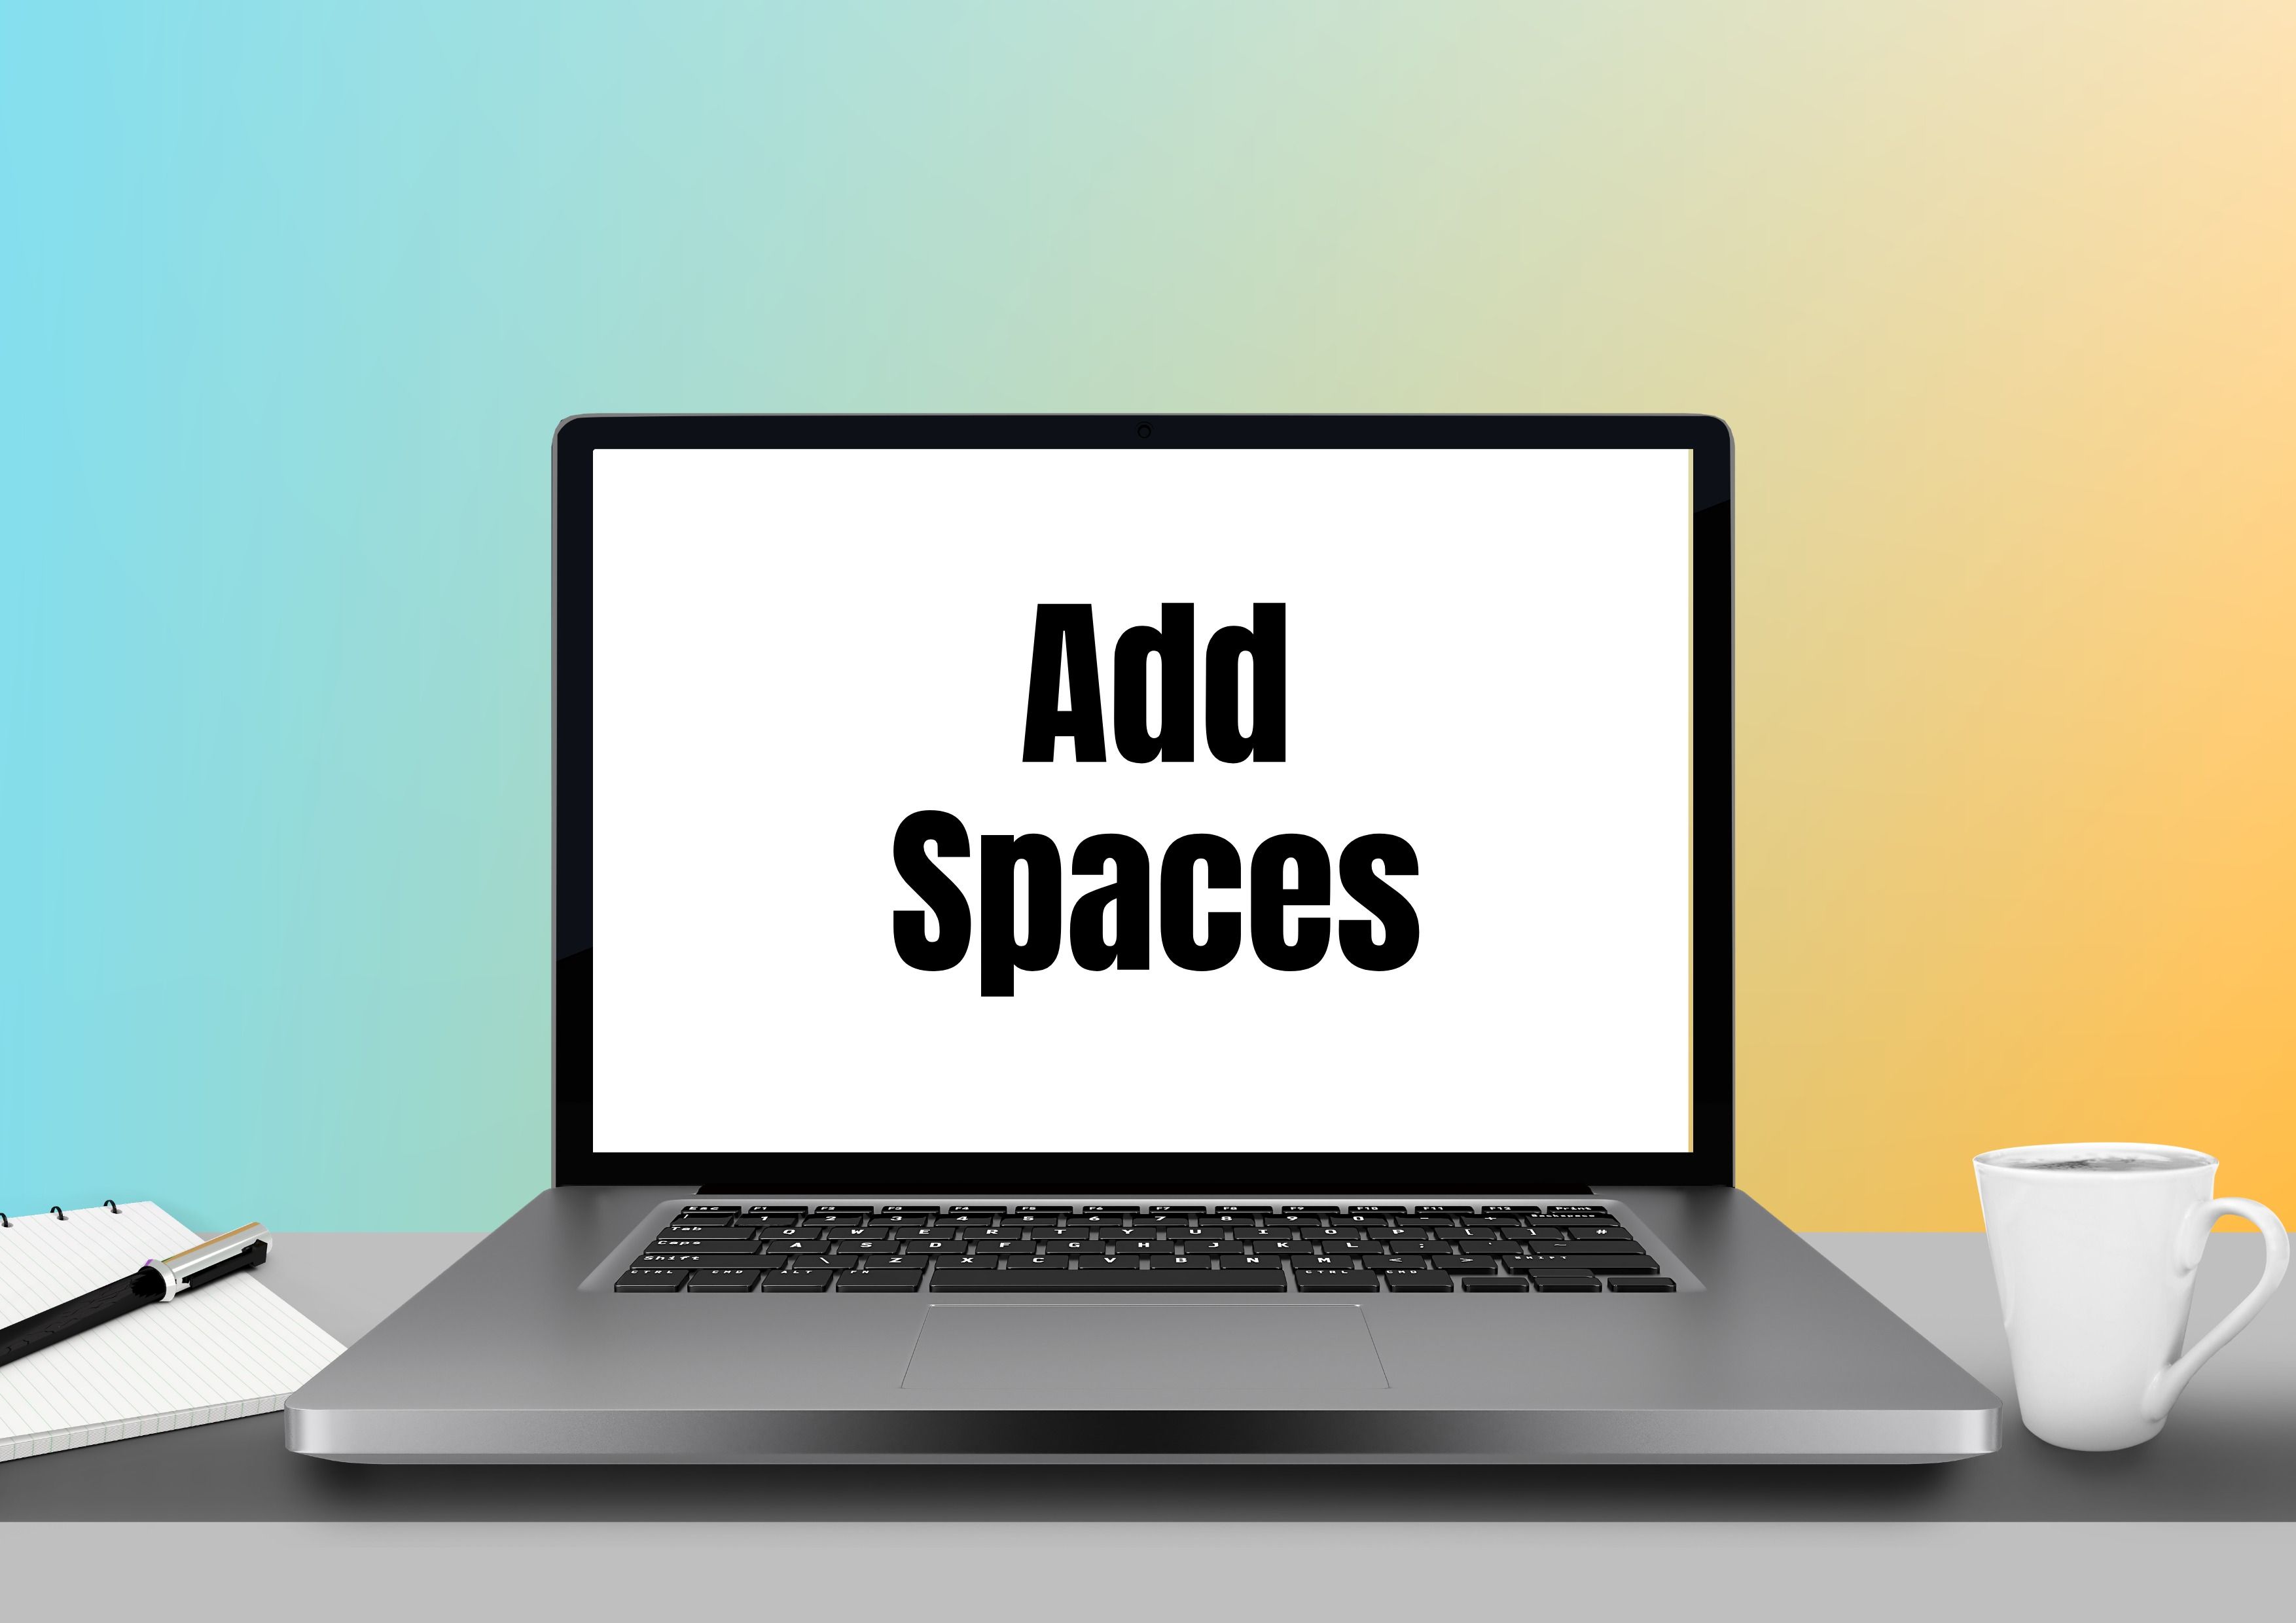 Open laptop on a desk with a blue and yellow background - Add spaces to your Instagram post - Image